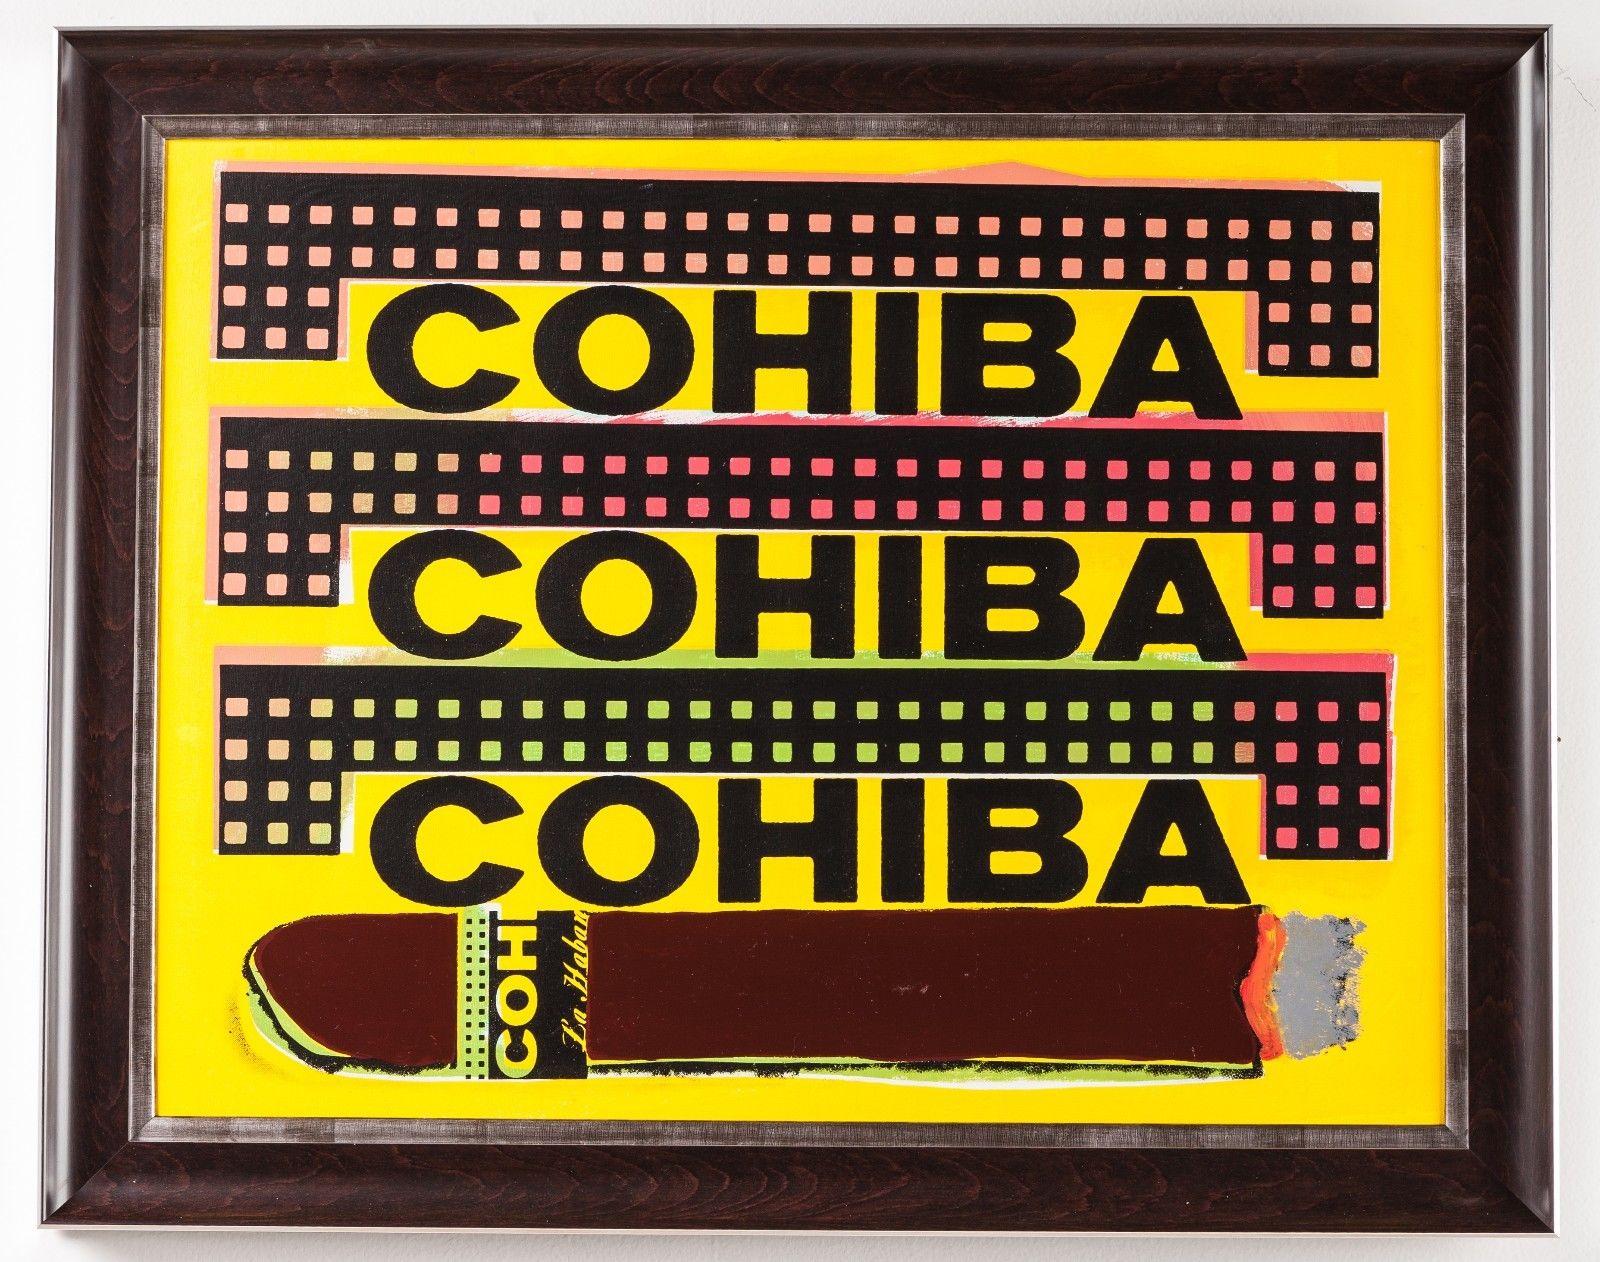 Artist: Steve Kaufman 
Title: Cohiba Medium: Original Oil Painting on Screen print Canvas 
Size: 25" x 19" Size Framed: 31" x 25" 
Edition size: 2/50pp 
Condition: The condition of this piece is outstanding.  The condition of the screen print is